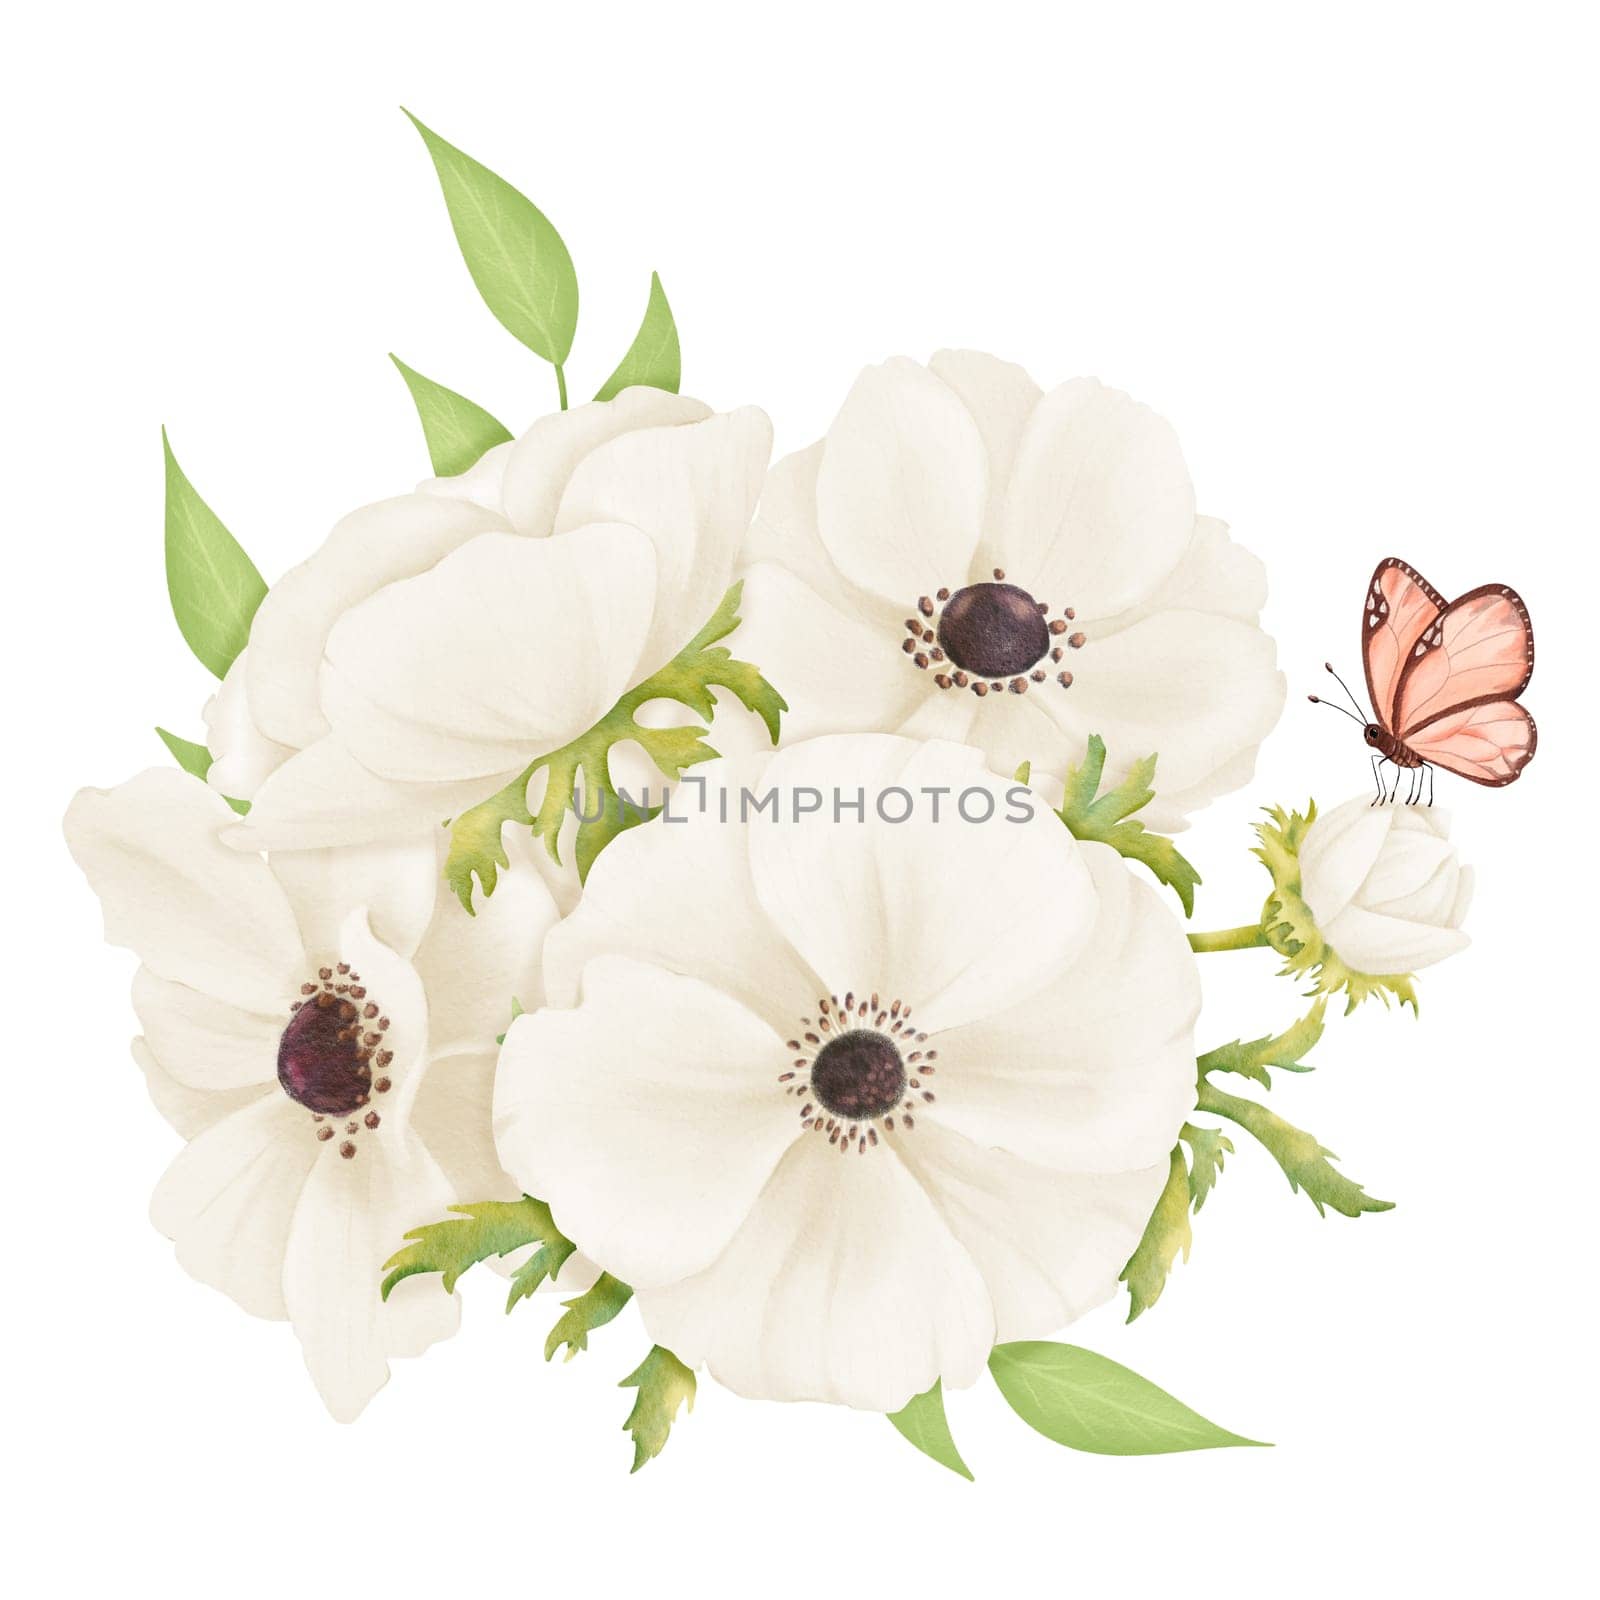 A watercolor floral composition of white anemones and fresh greenery, with a butterfly. for enhancing wedding stationery, event invitations, botanical prints, art projects and decorative crafts.